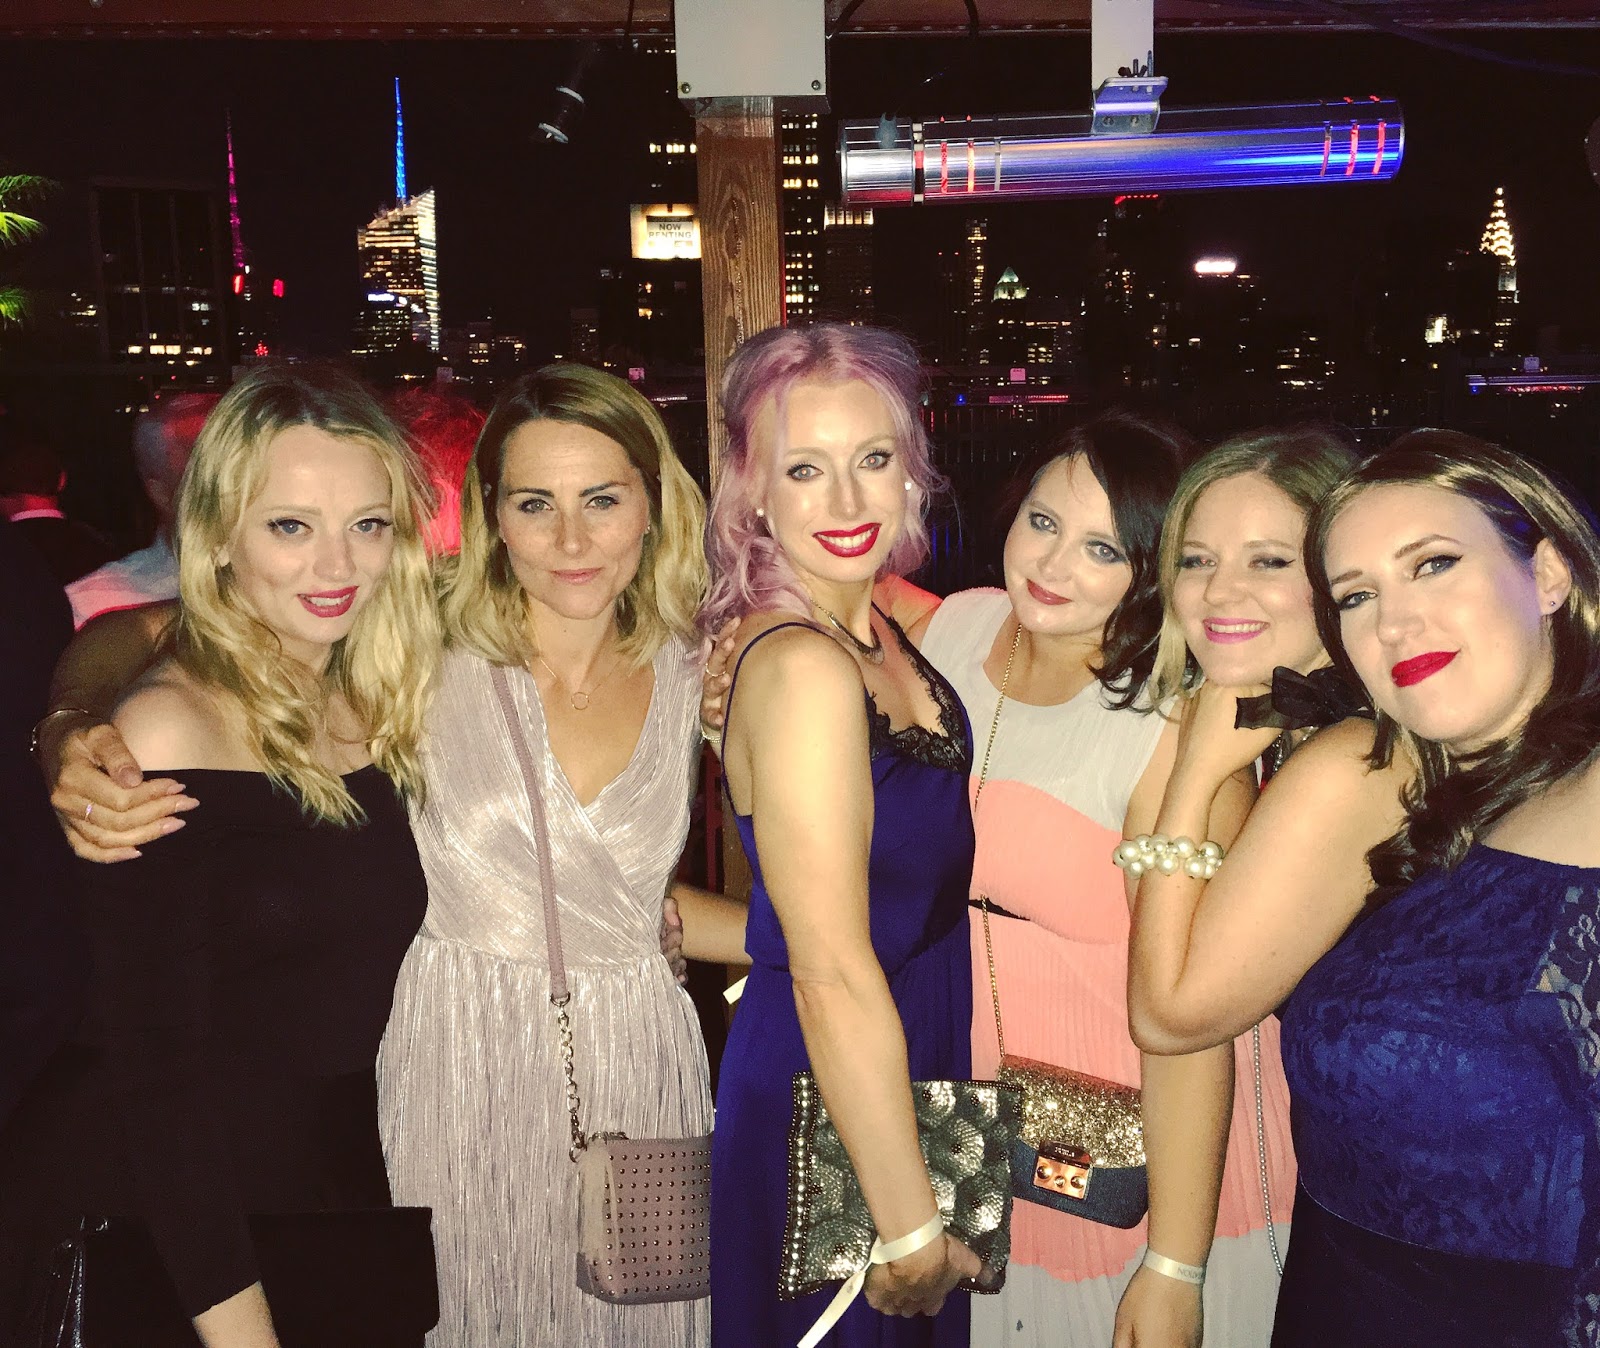 Michael Buble, By Invitation launch in New York with thirty plus bloggers